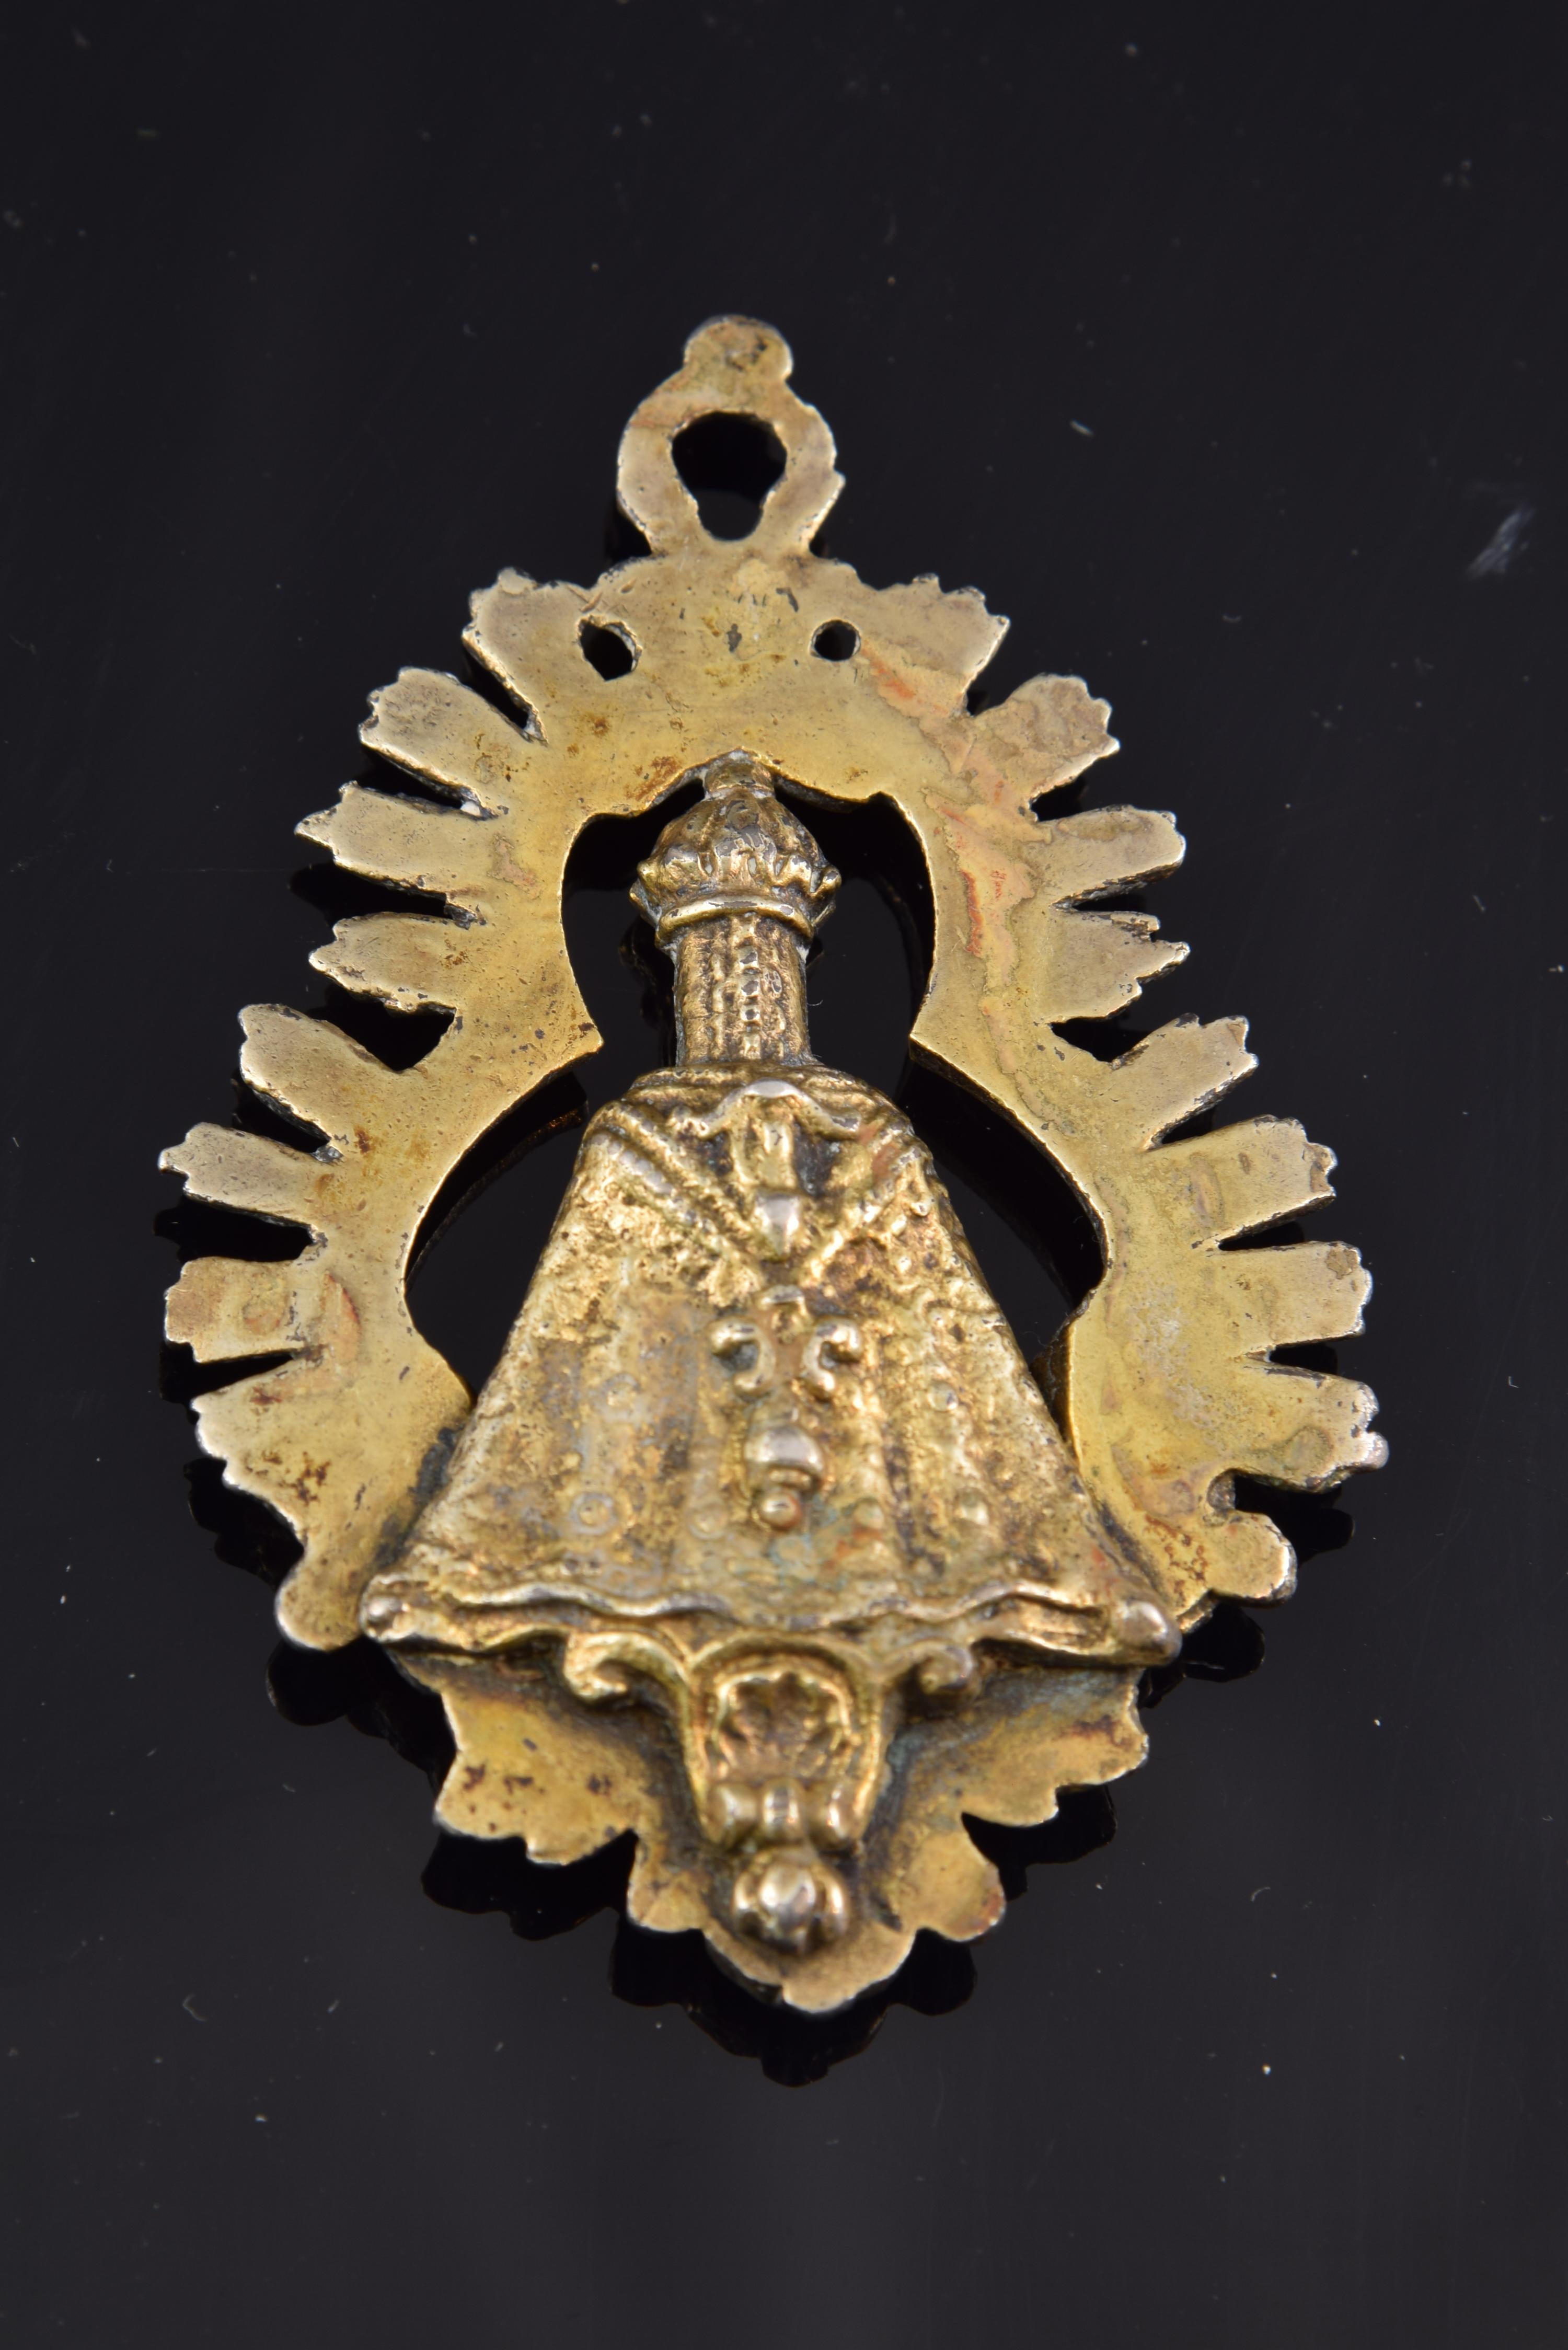 Medal. Spain, 18th century.
 Devotional medal made of gilded metal that shows an image of the Virgin Mary, placed on a pedestal and surrounded by a radiant trilobed halo. Towards the bottom you can see heads of winged angels, and note that the back